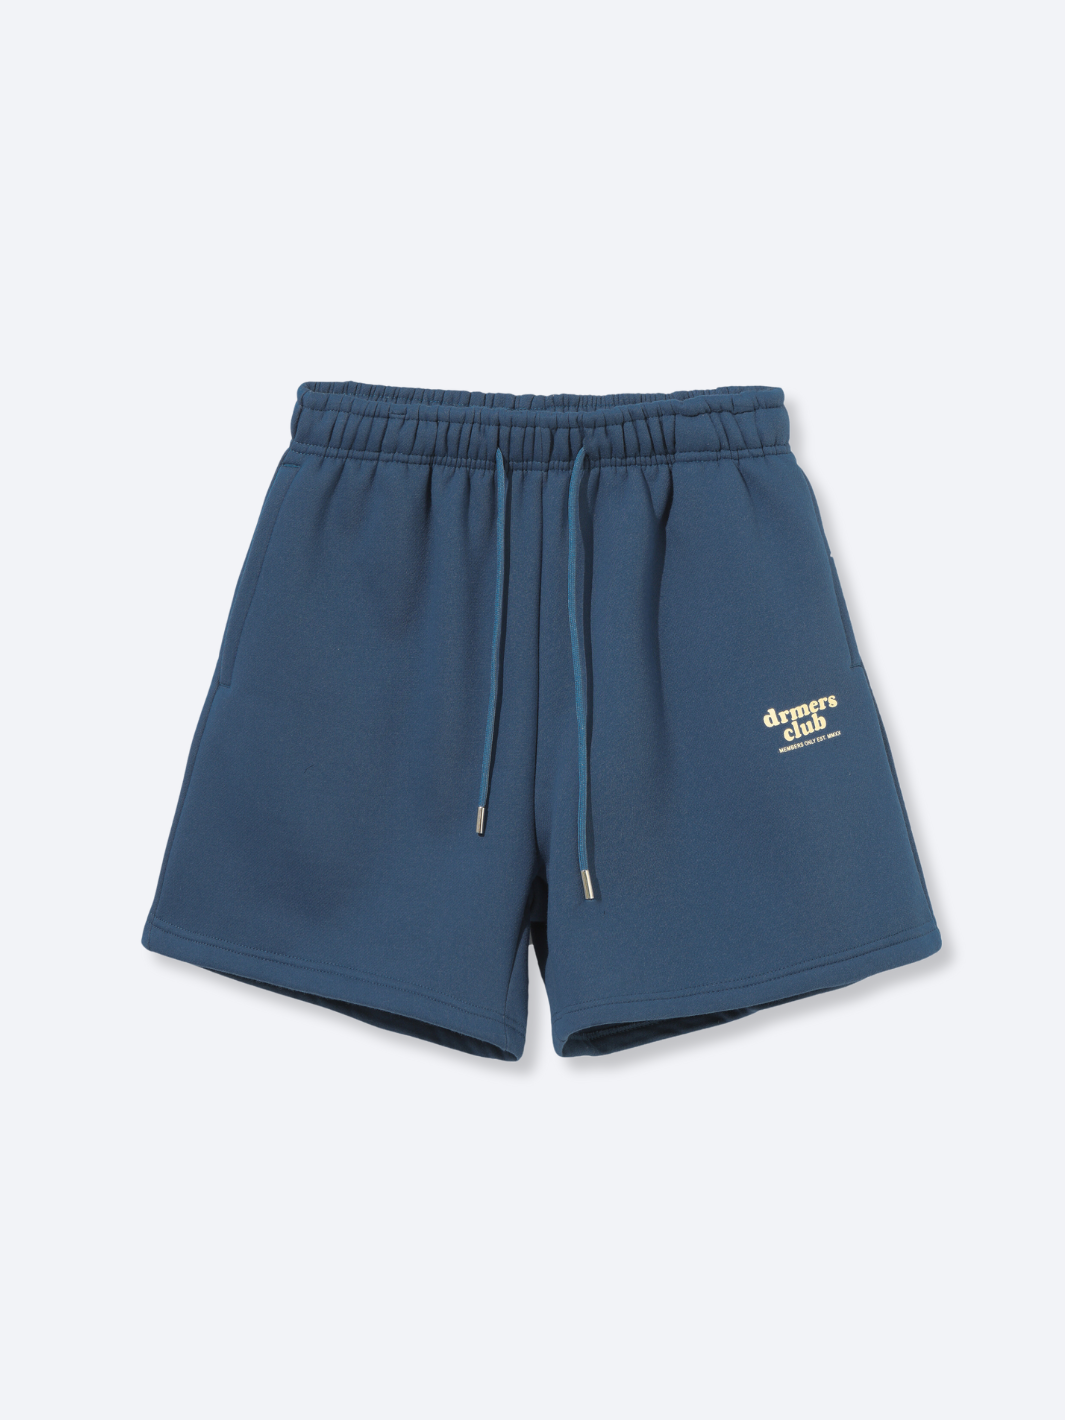 MEMBERS ONLY SWEAT SHORTS - NAVY BLUE